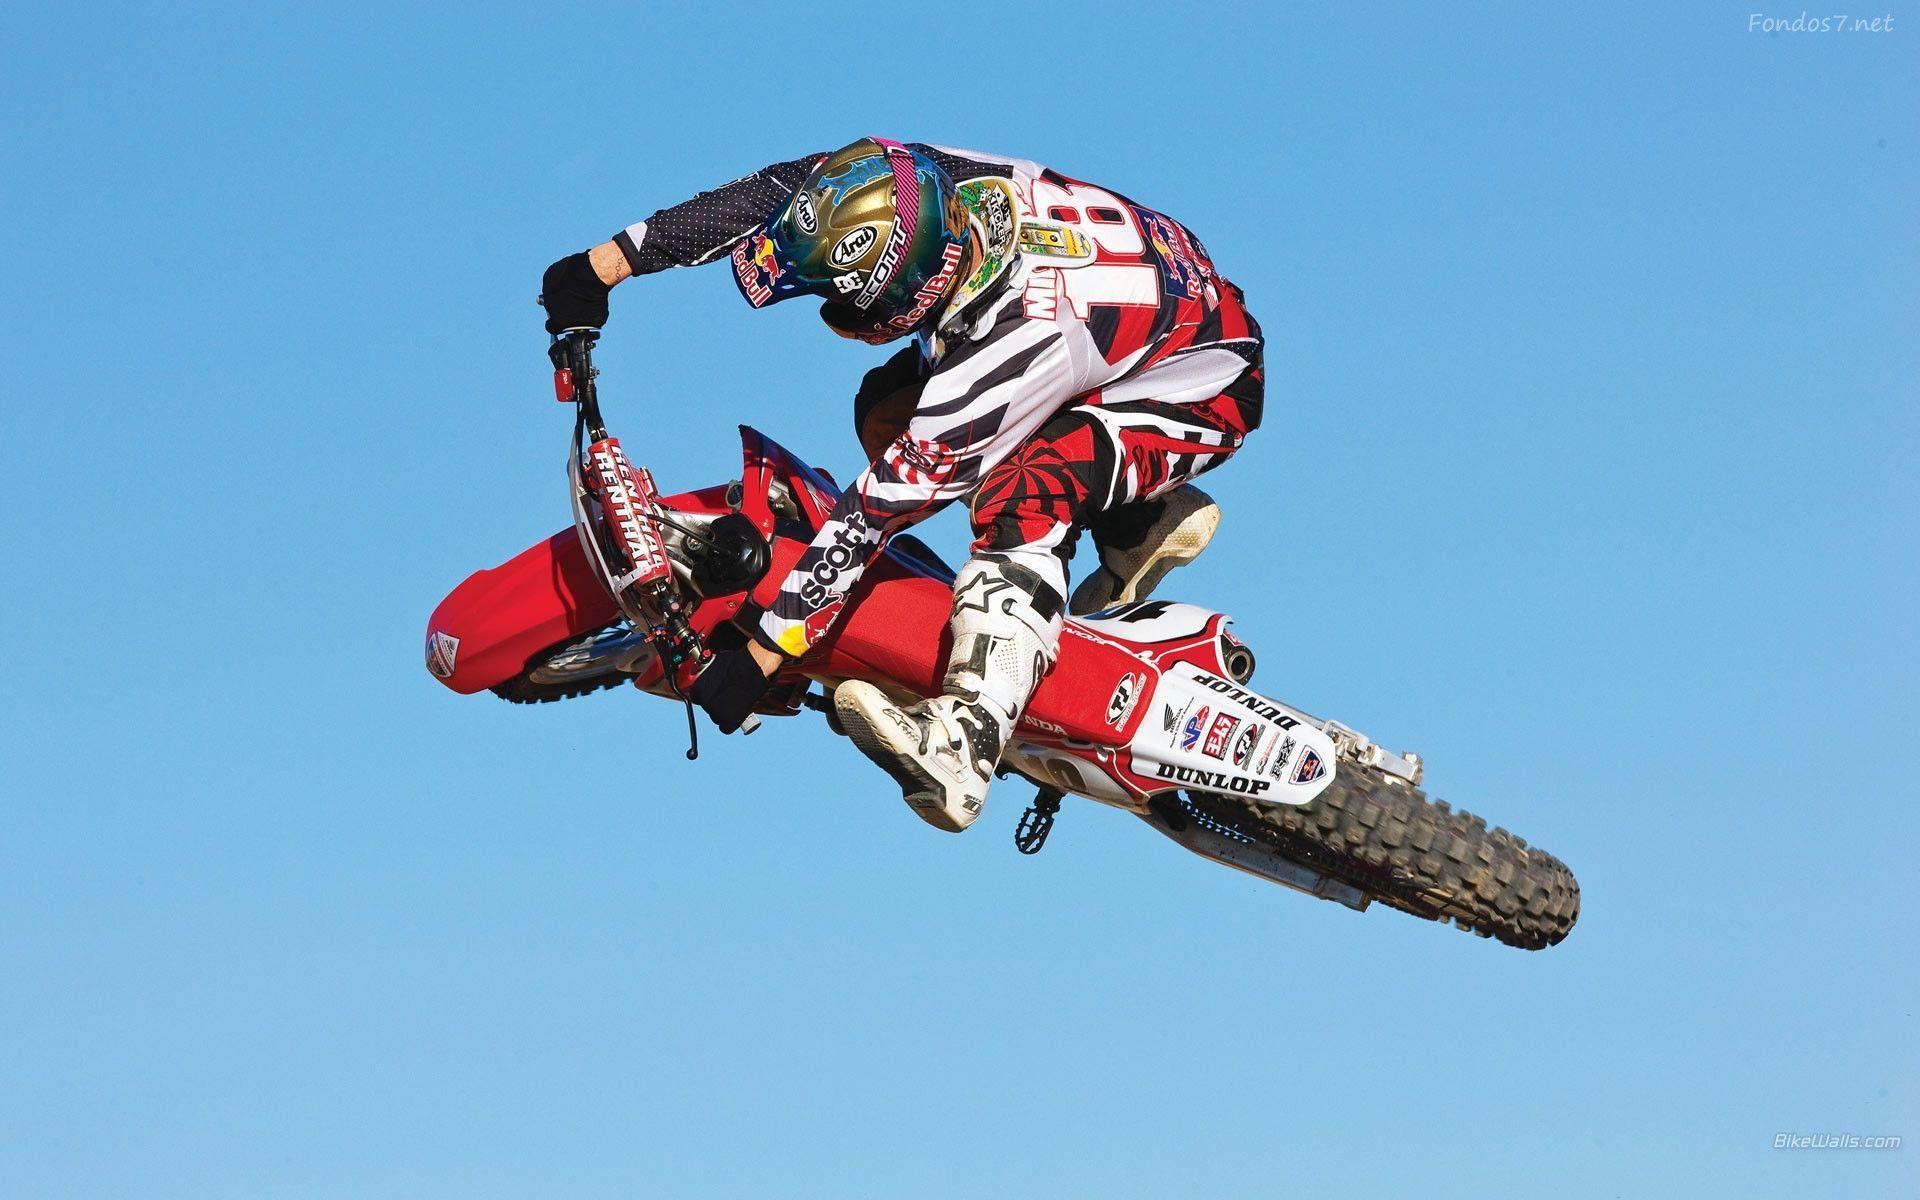 Motocross Freestyle Image Gallery 23206 High Resolution. HD